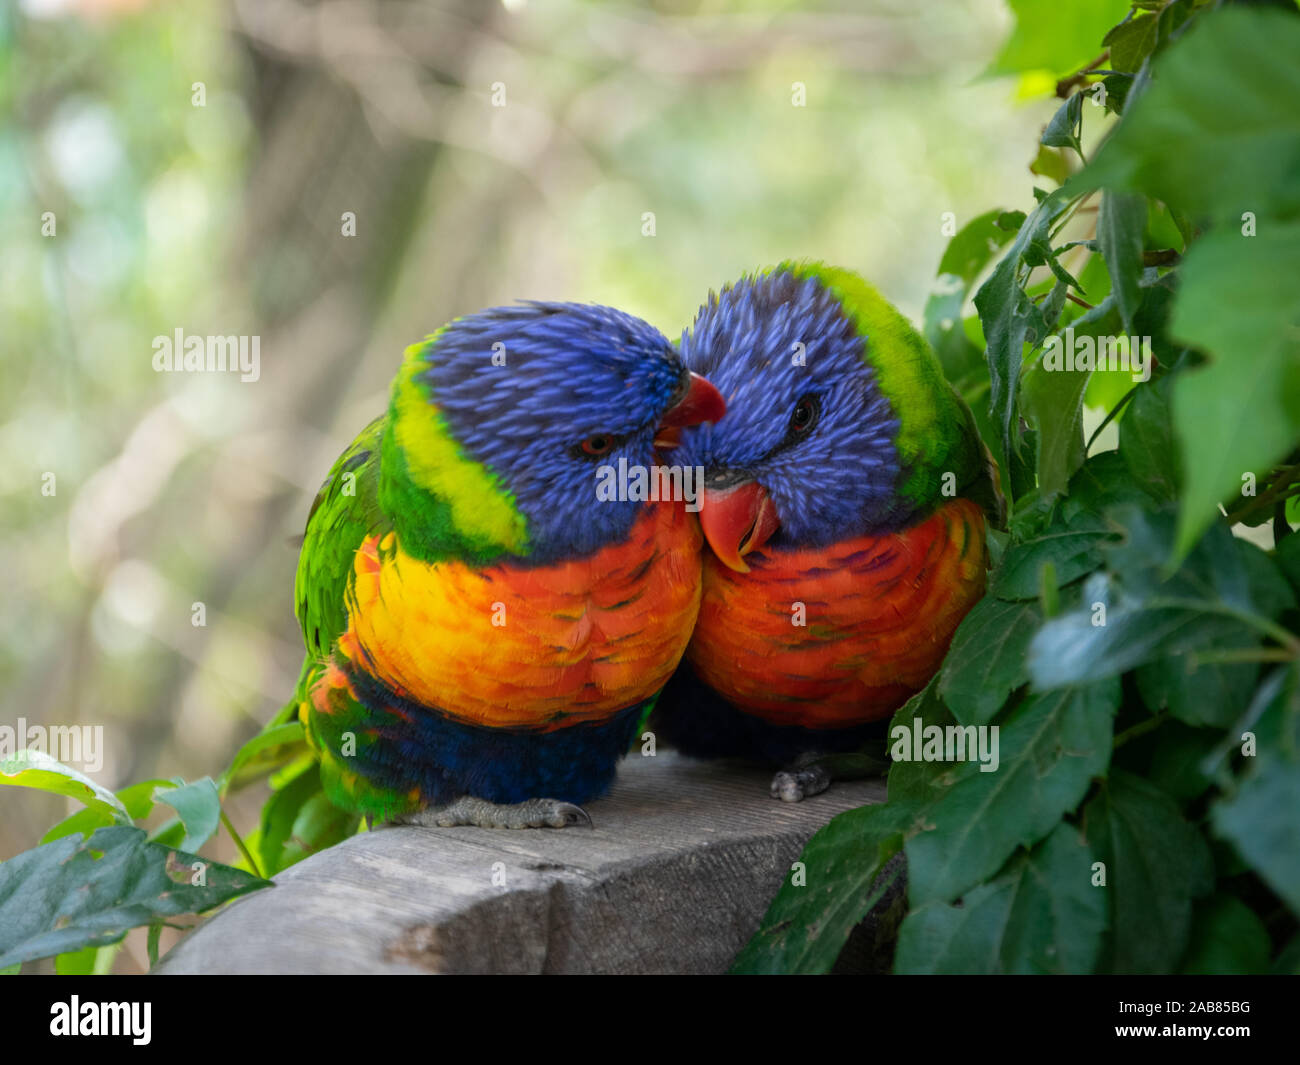 Narrow depth of field shot of two rainbow lorikeets preening each other on a stone basin. Stock Photo